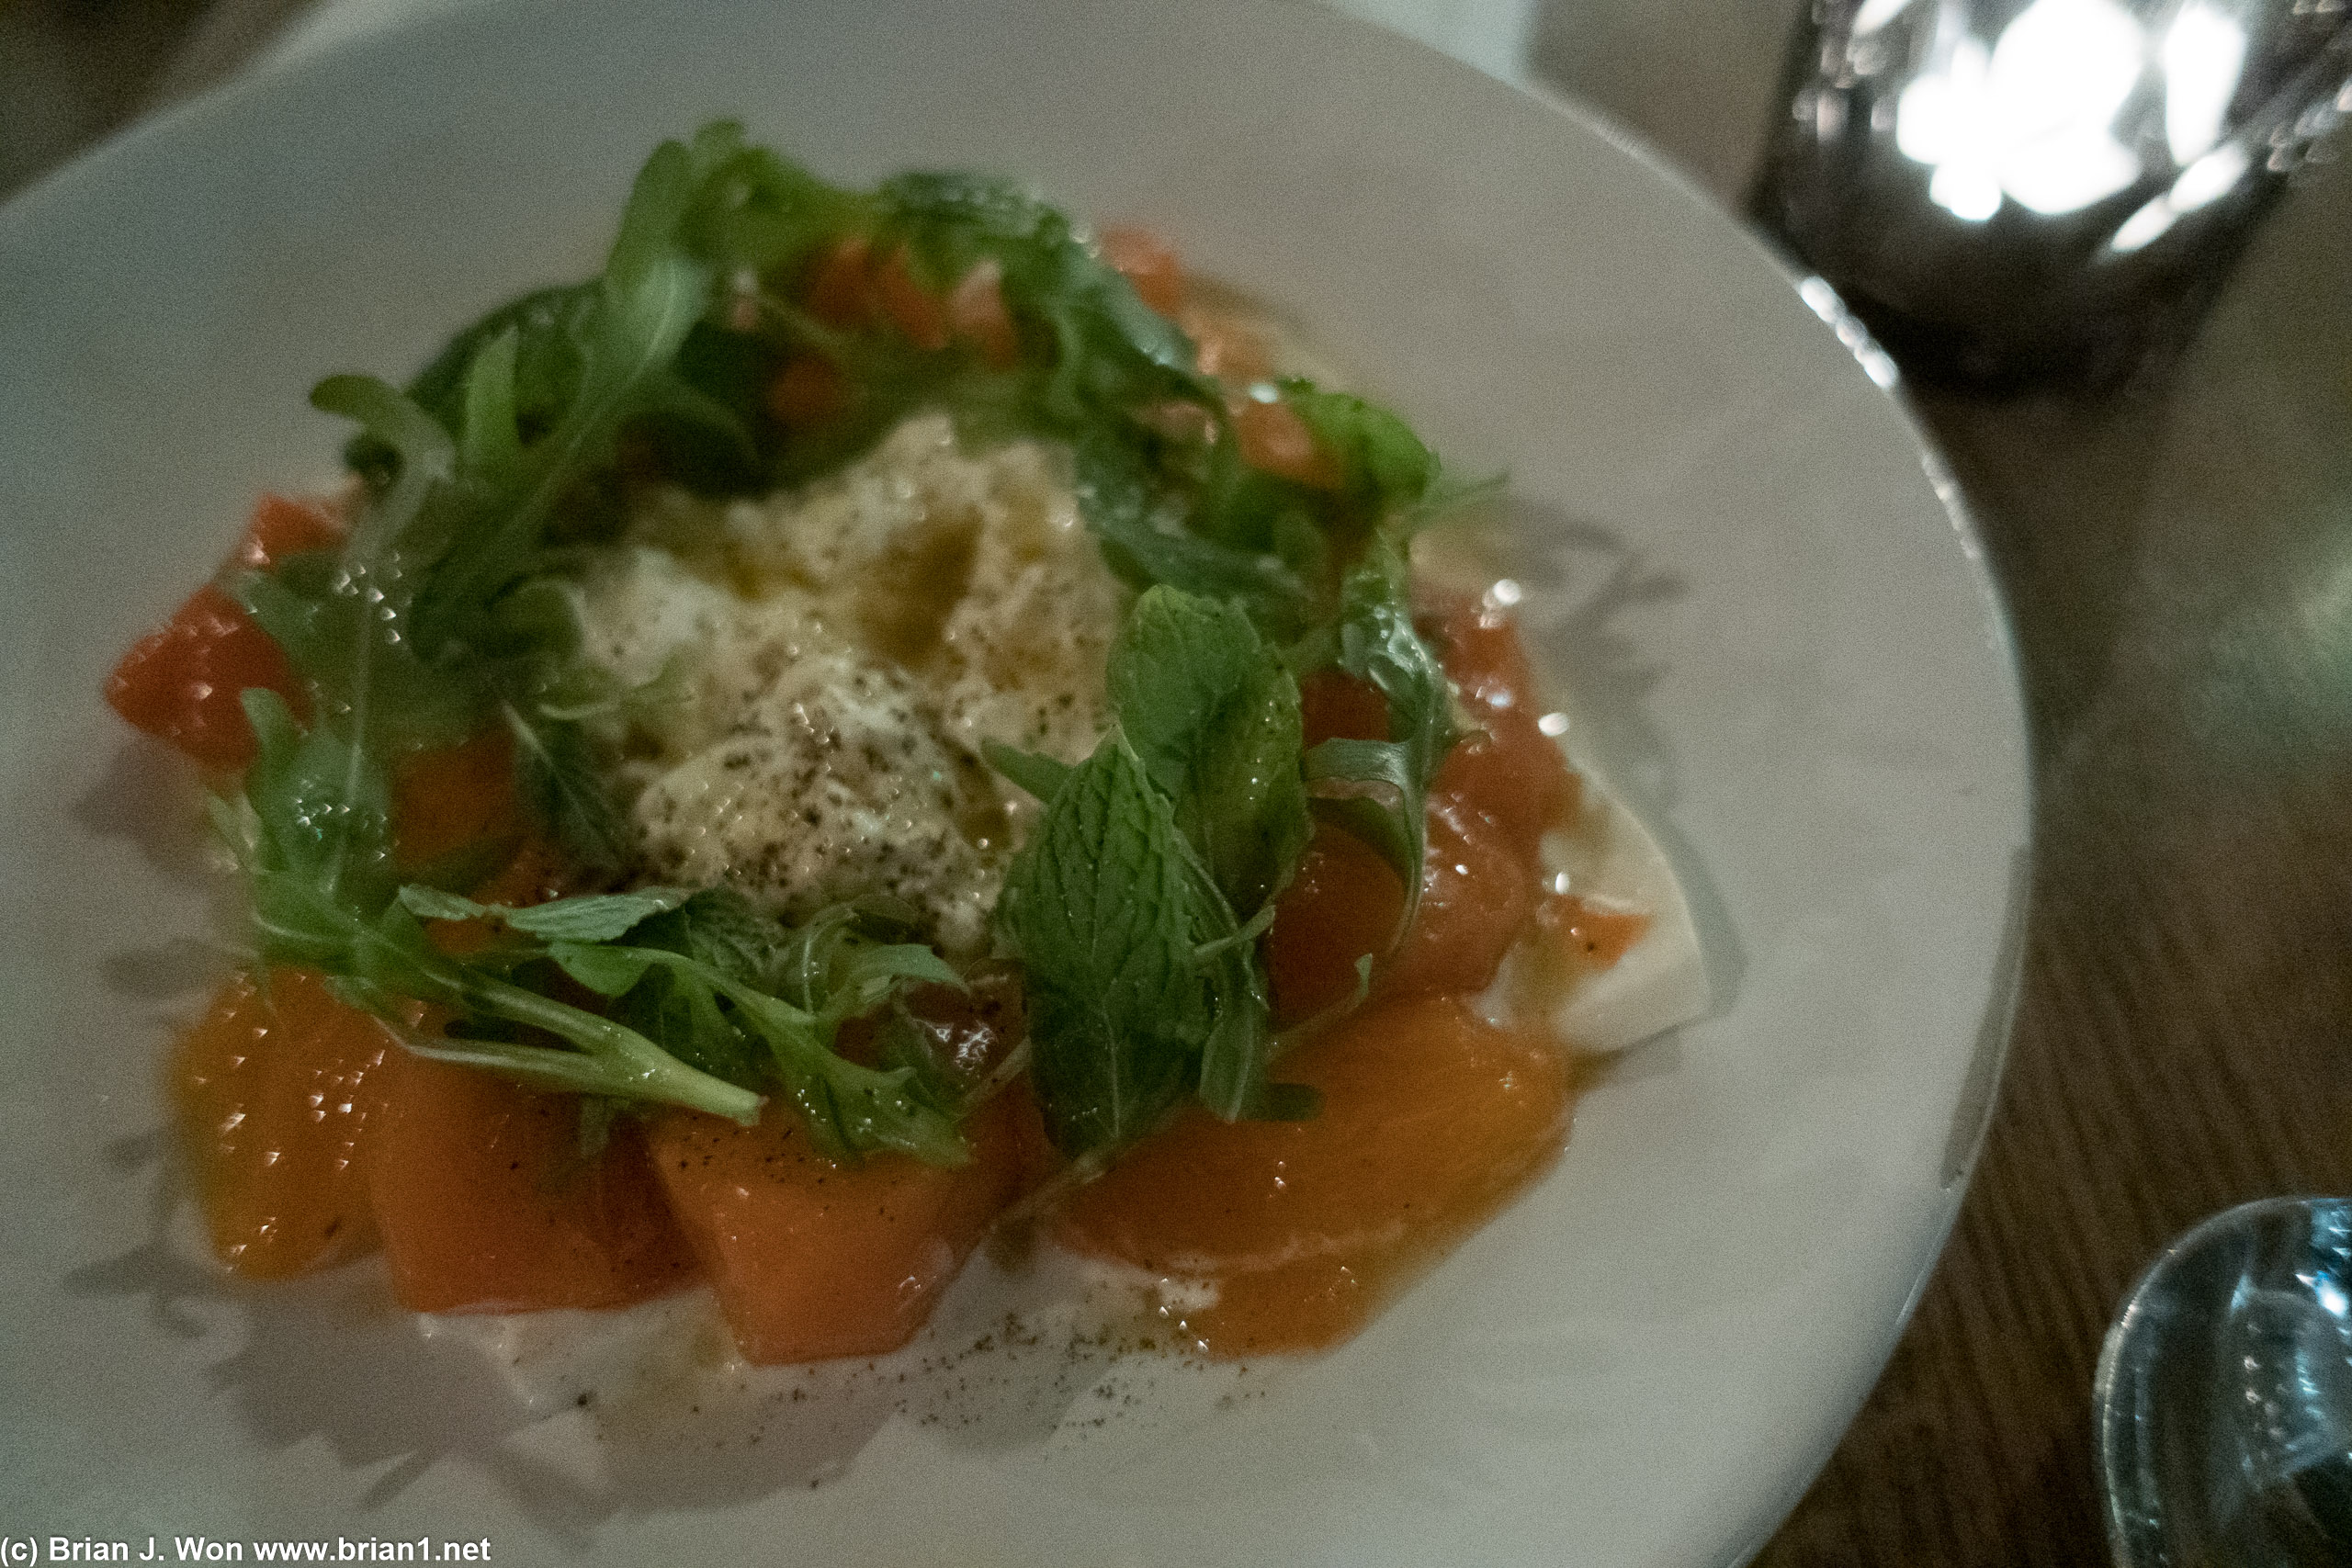 Buratta. Persimmon and mint. If anything it could have used a tad more persimmon and mint-- that was a lot of cheese!